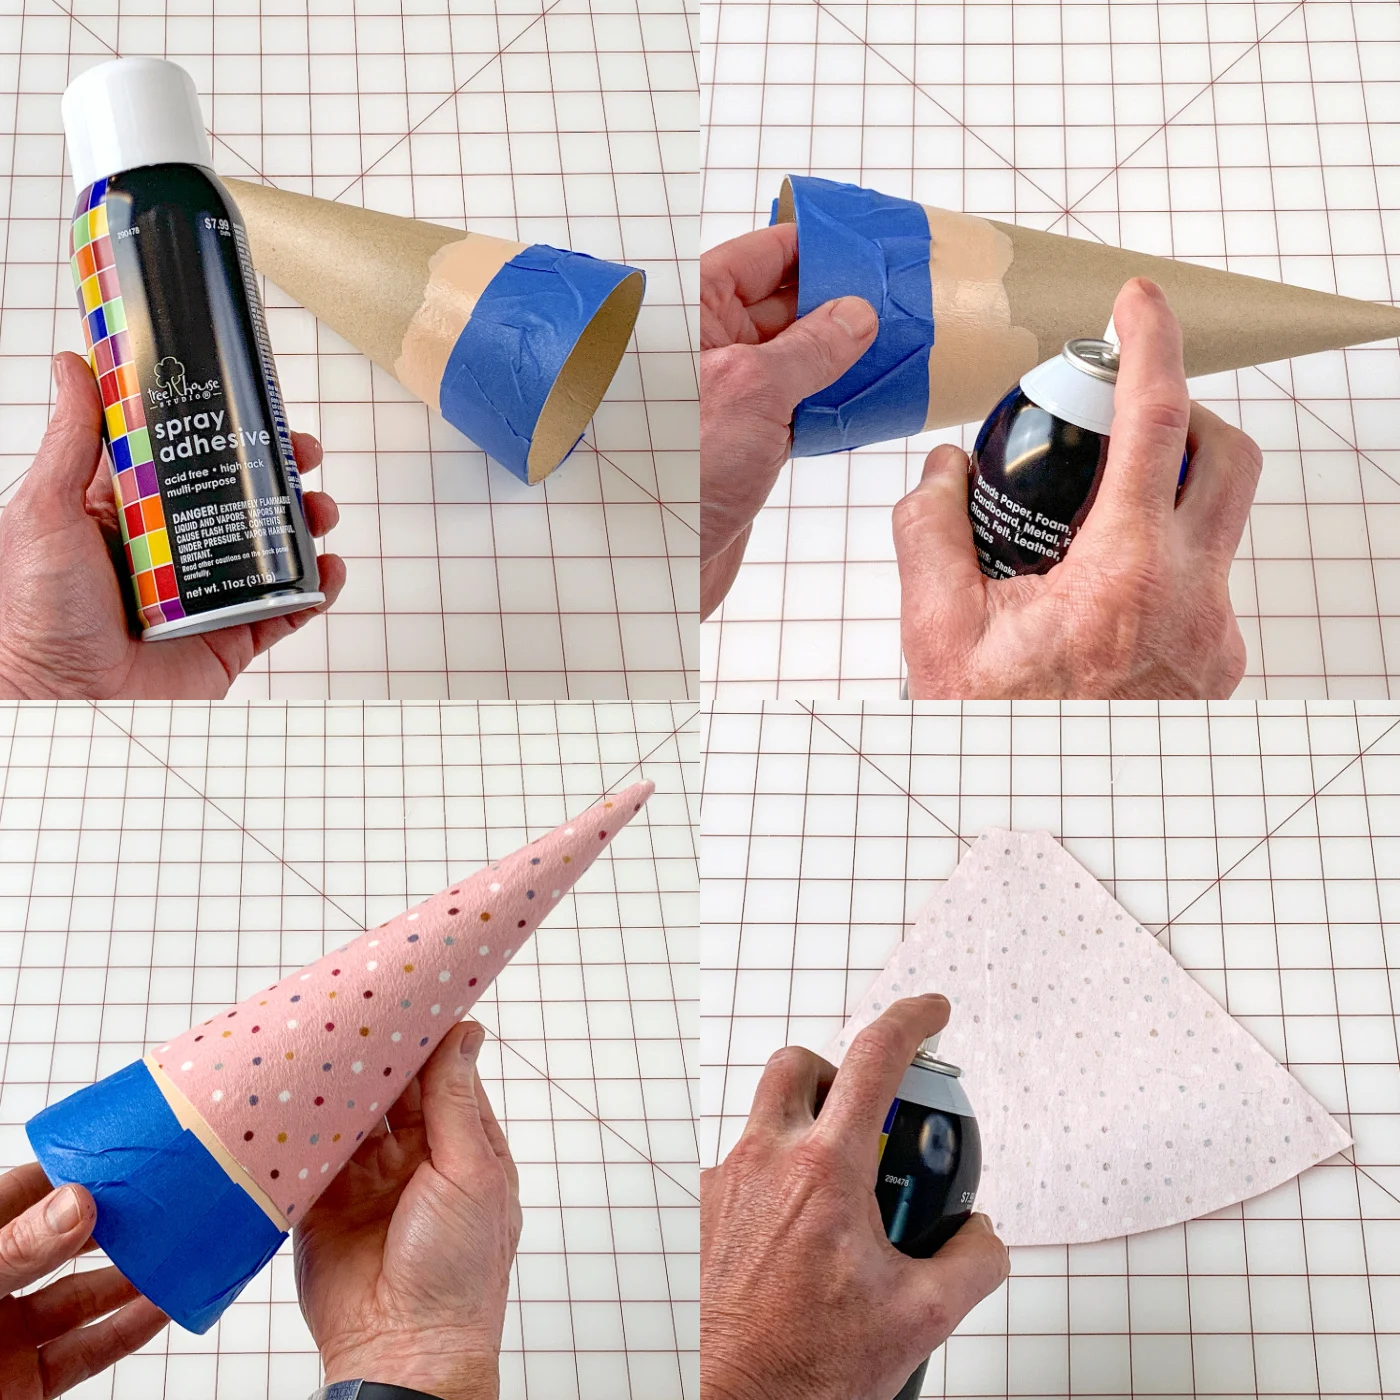 Spraying the polka dot fabric with spray adhesive and wrapping around the paper cone